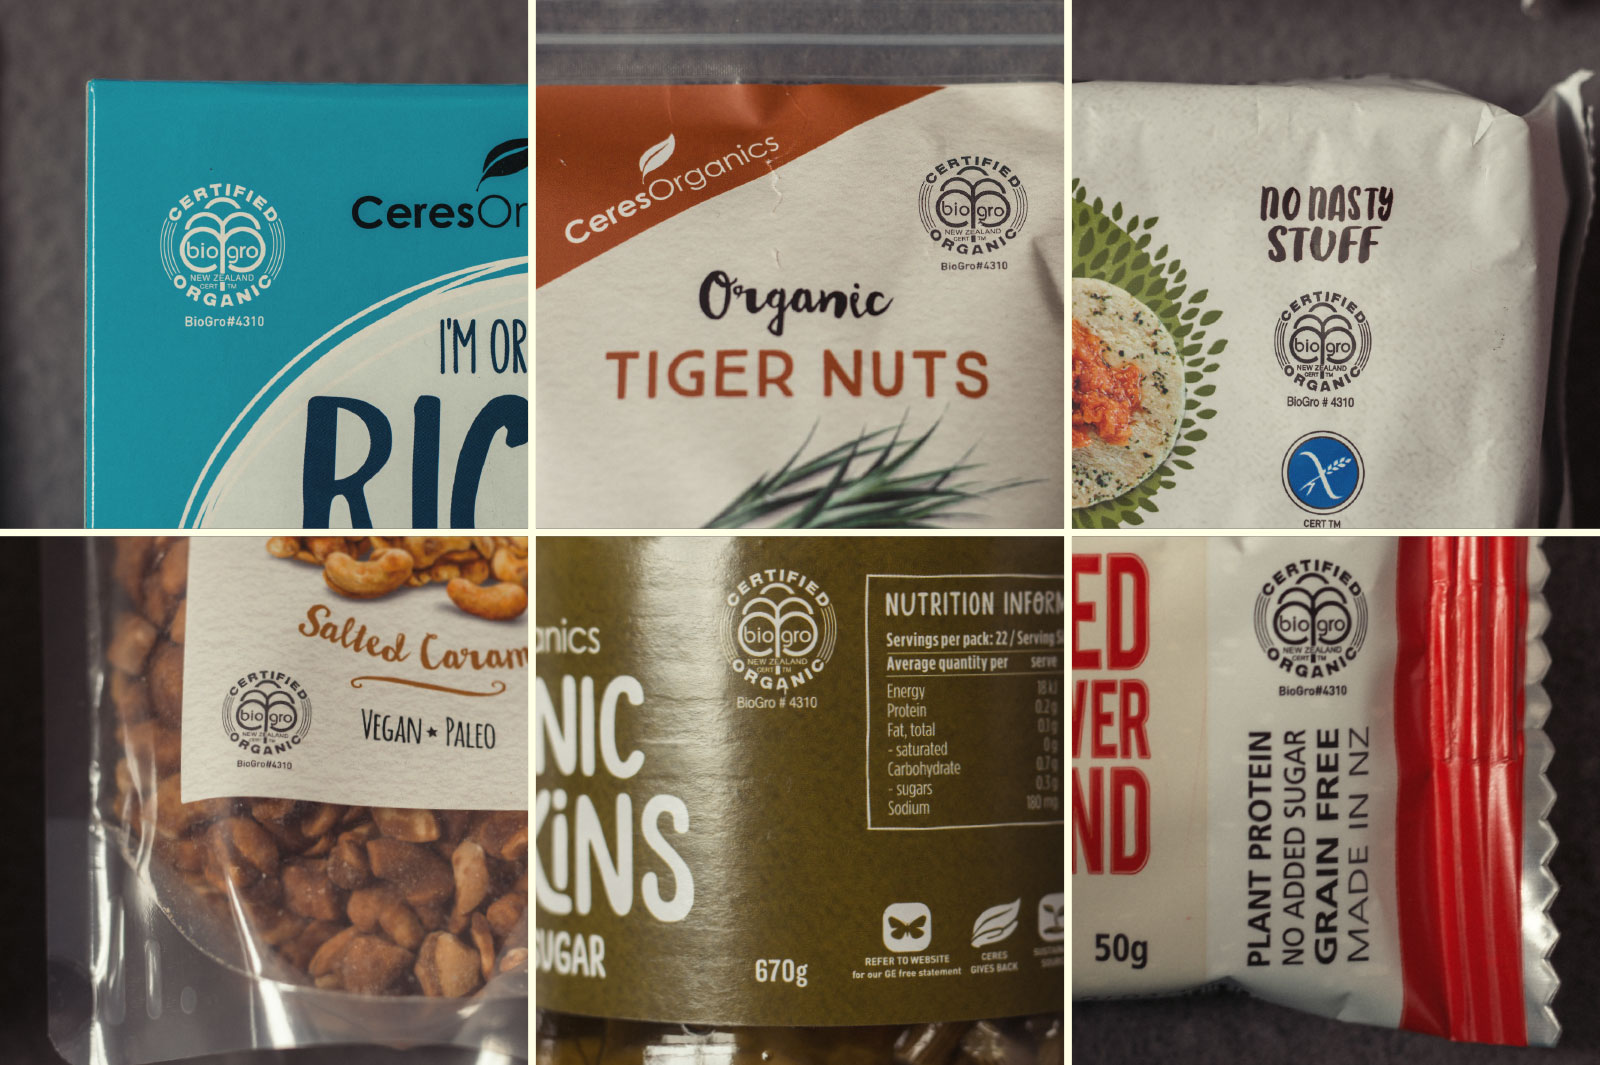 A selection of Ceres organics products featuring their organic certification